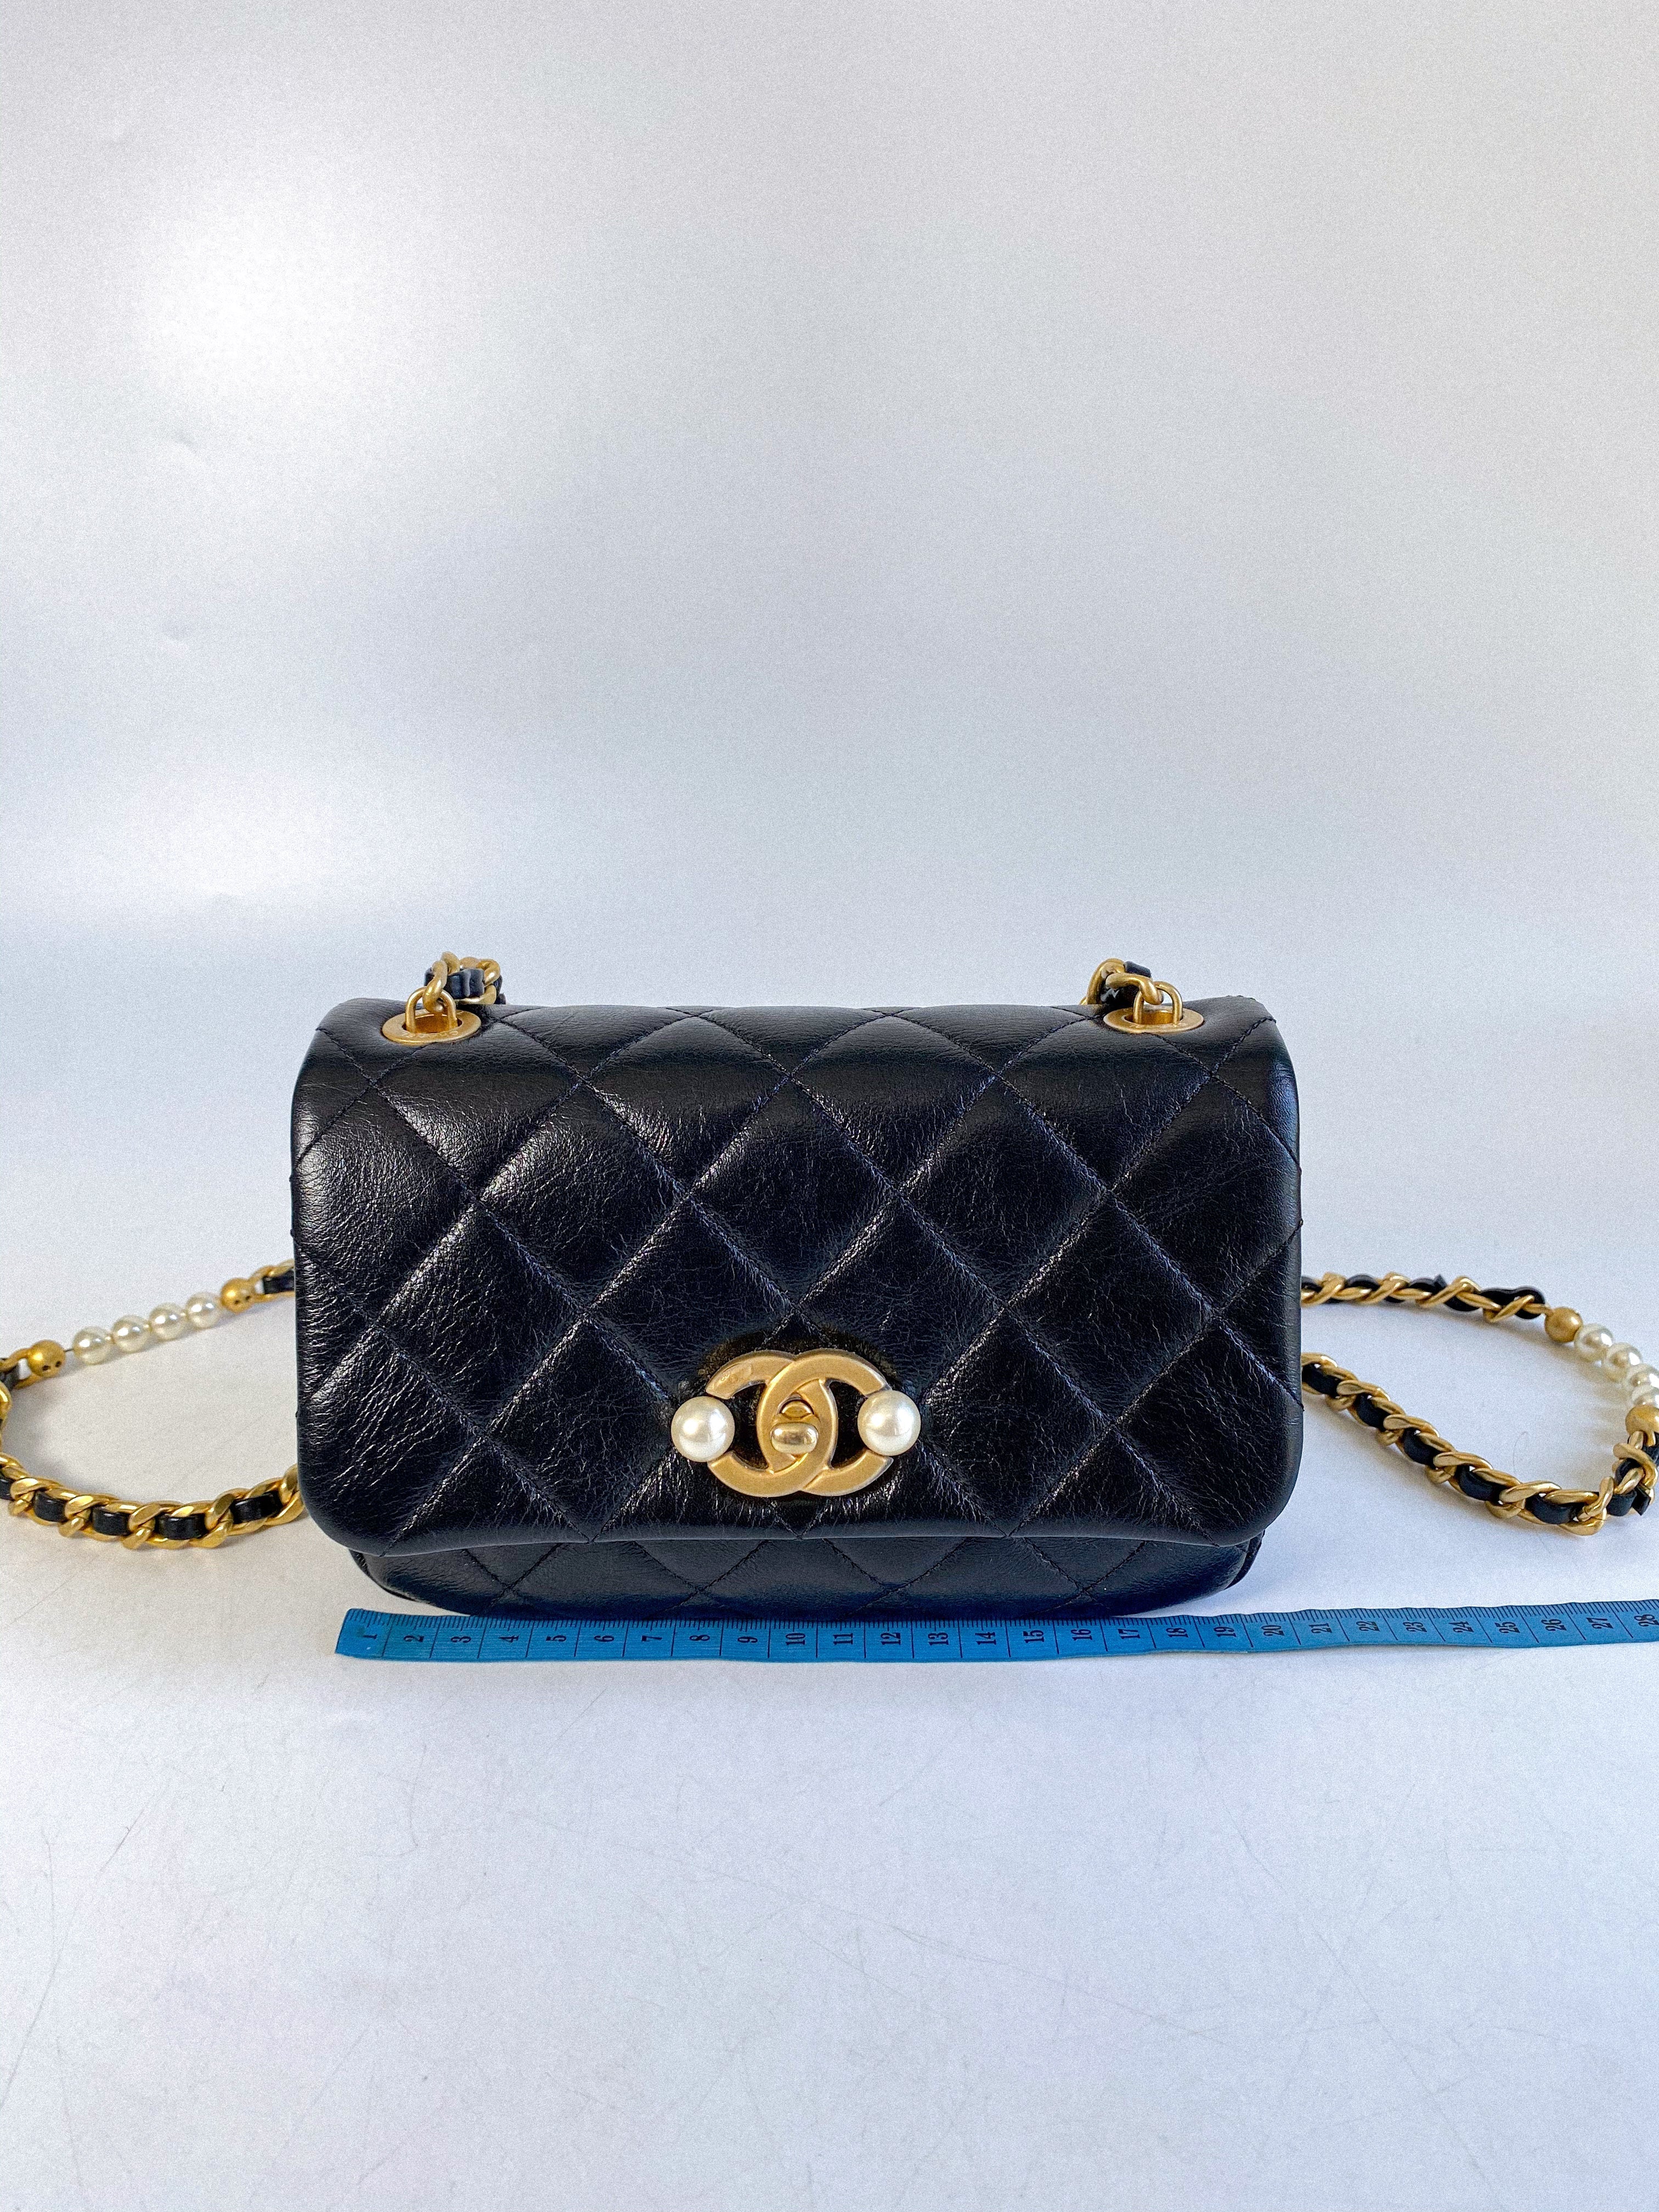 Chanel Seasonal Mini Flap Pearl CC and Chain in Black Calfskin and Aged Gold Hardware (Microchip)